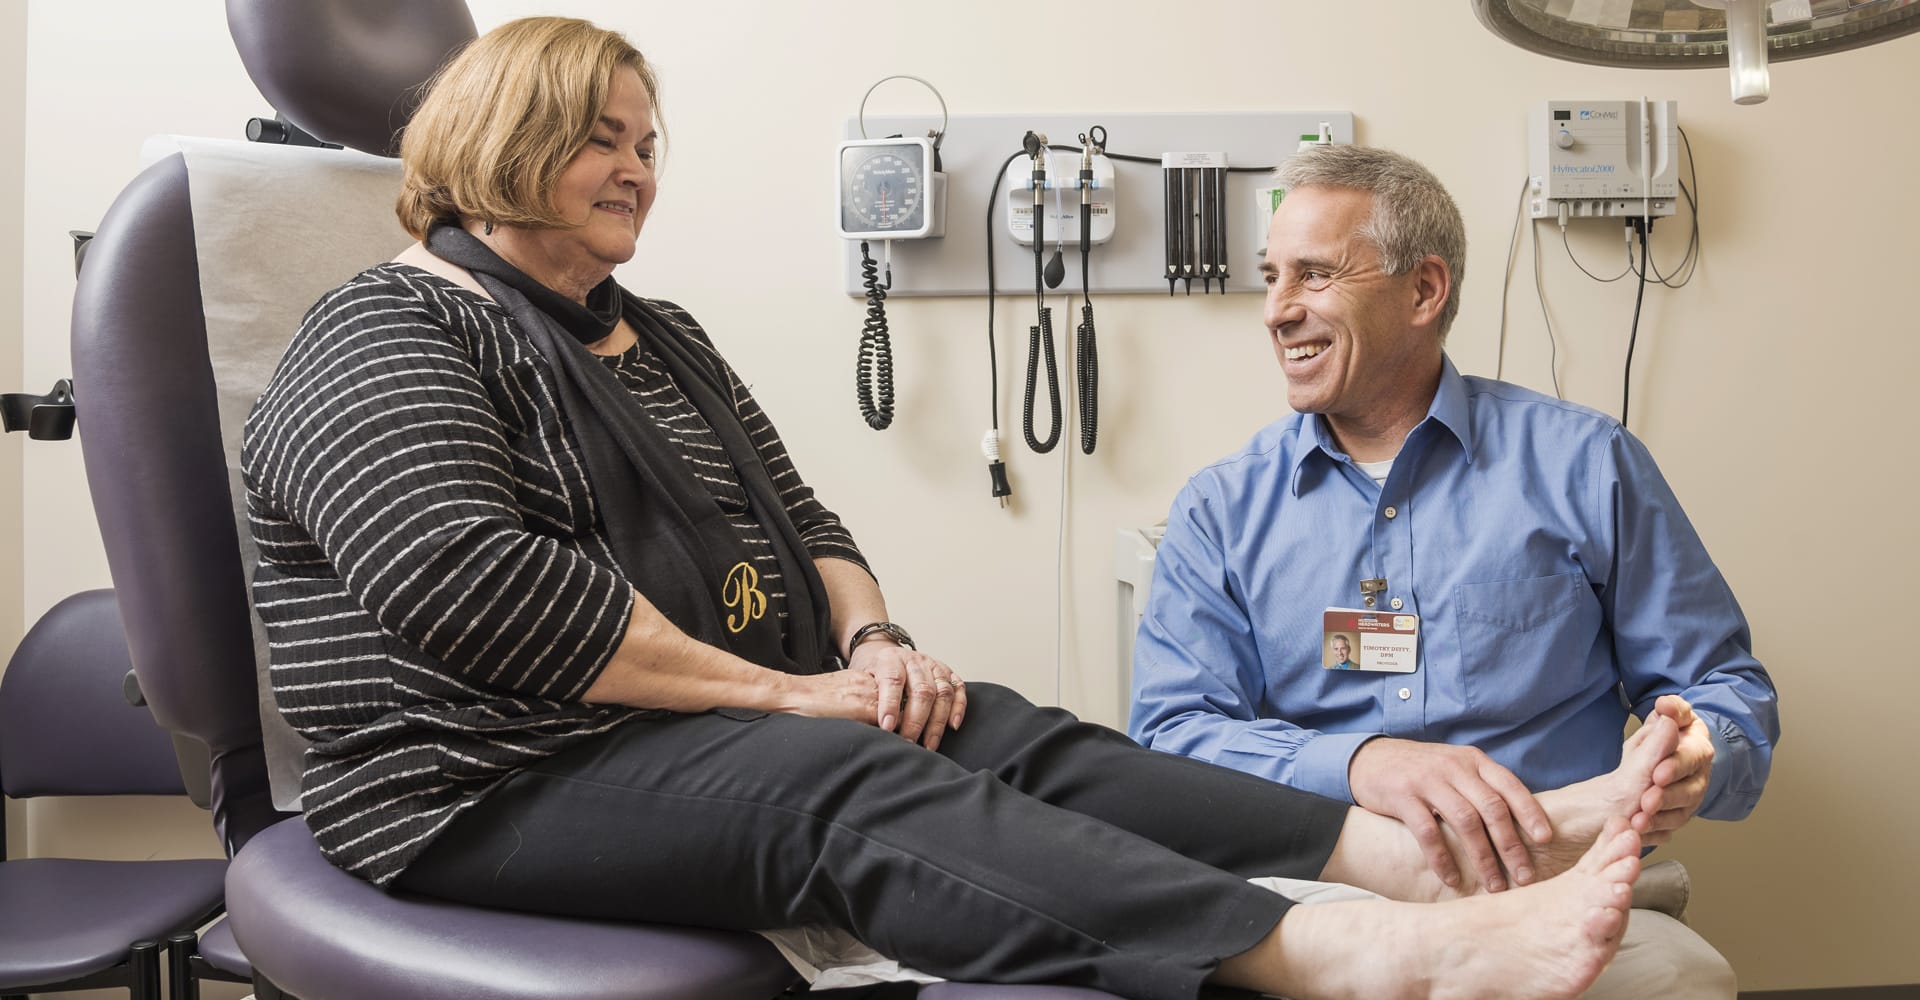 A health care provider examining the feet of a seated patient